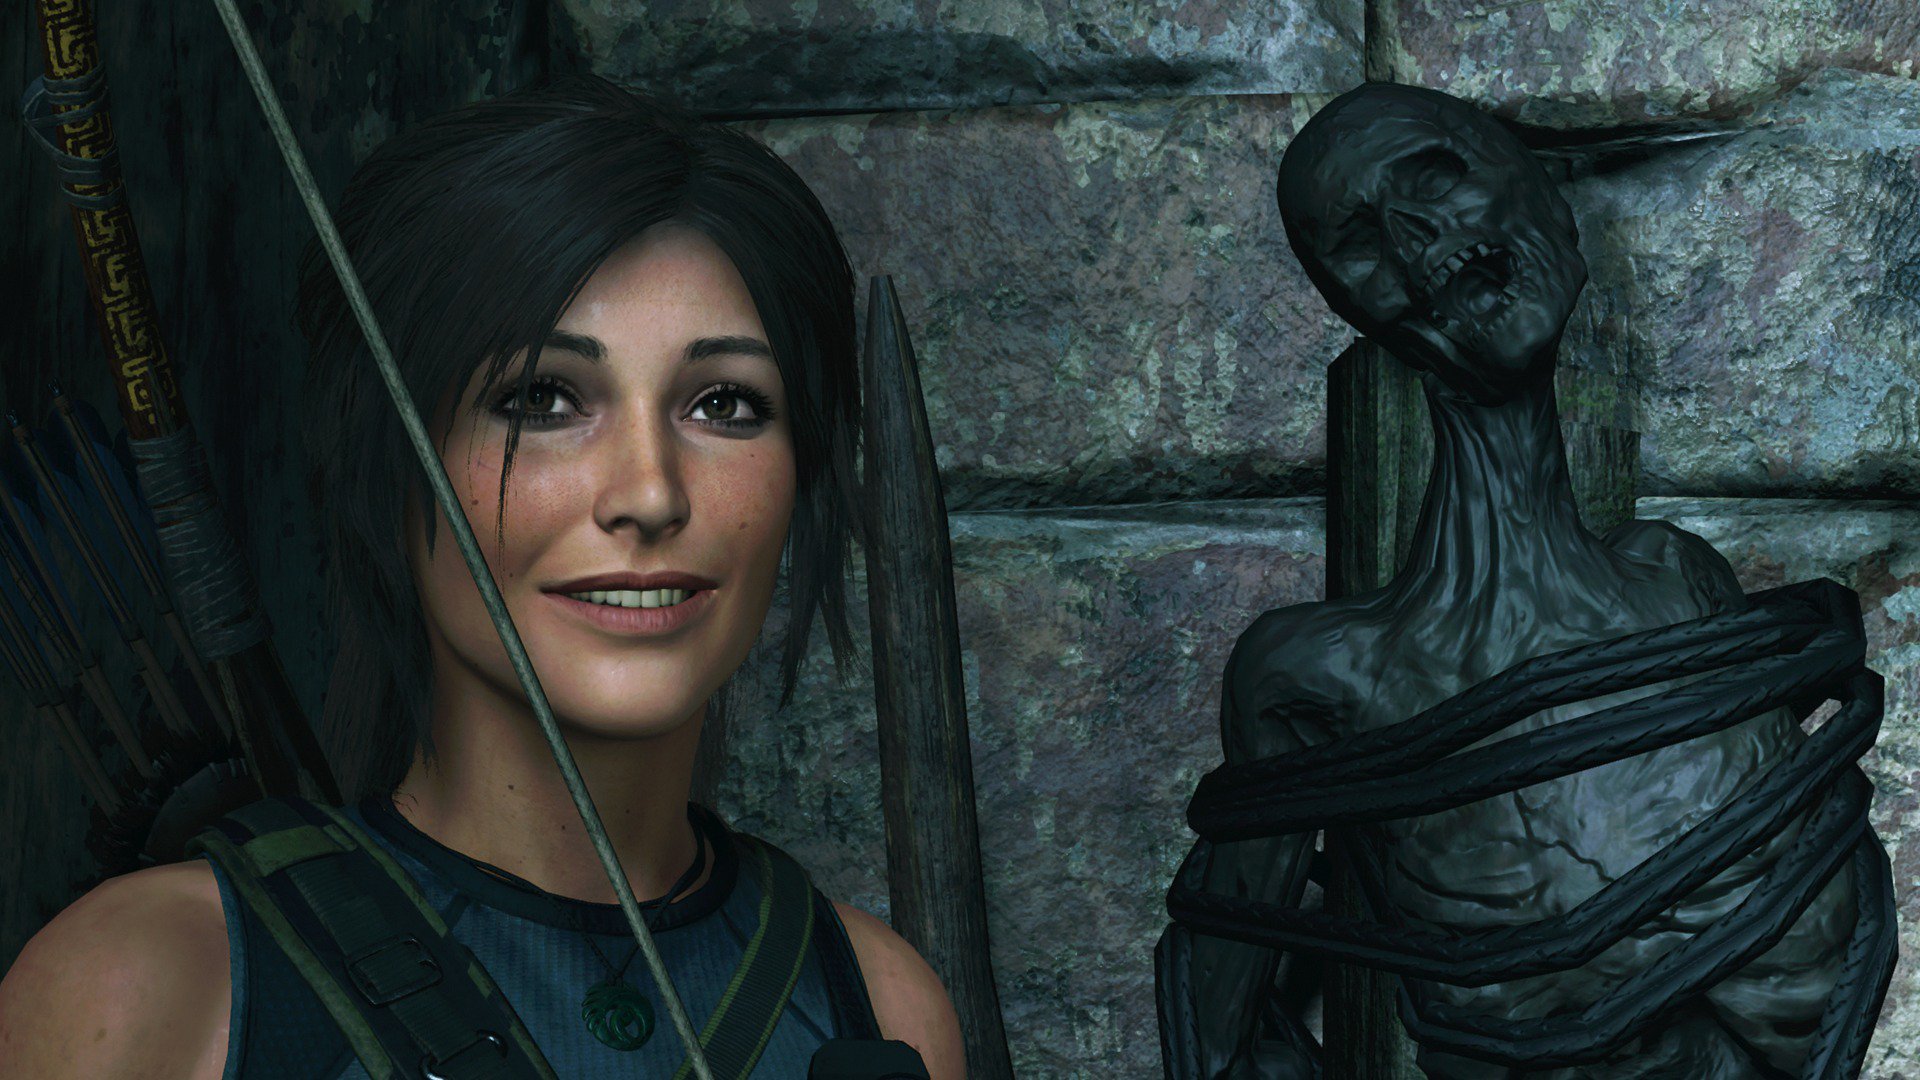 Image for Crystal Dynamics now has "control" of Tomb Raider following Square Enix sale